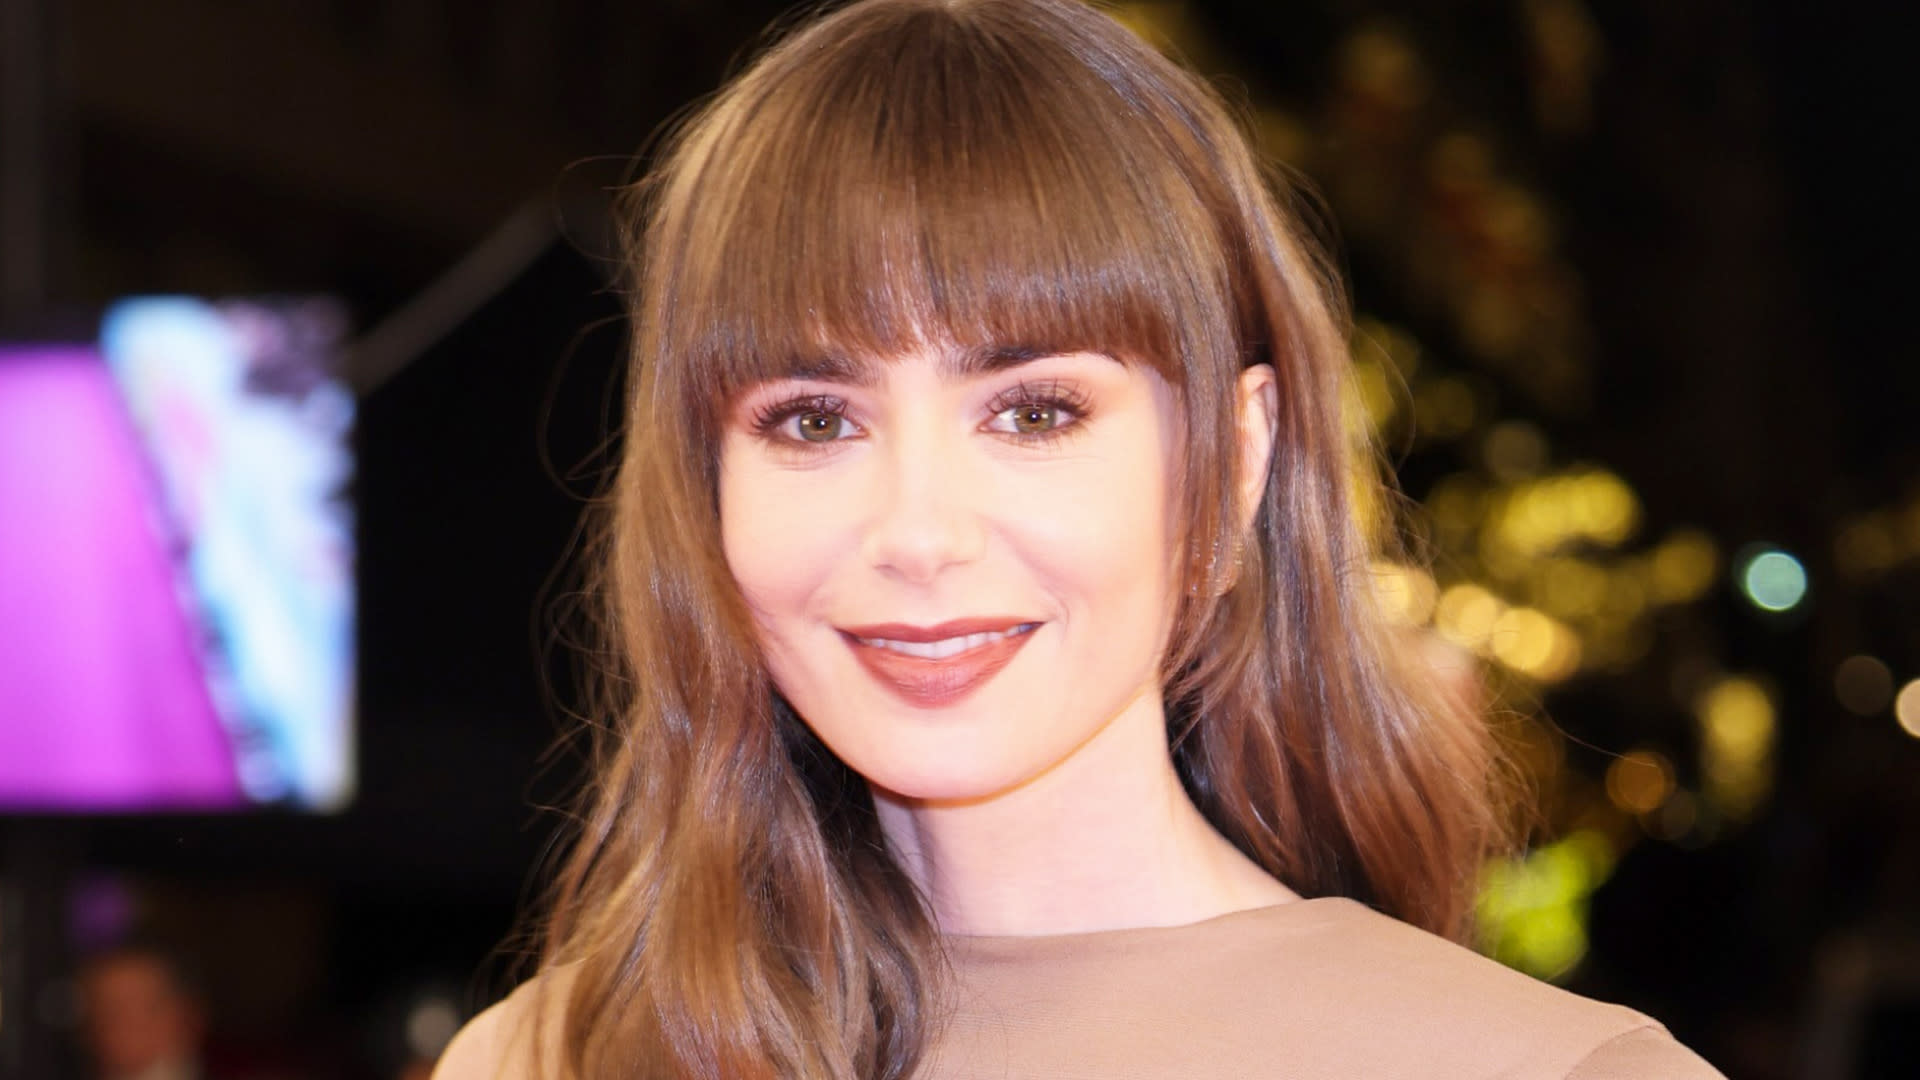 Here's an Update on the Polly Pocket Movie Starring Lily Collins